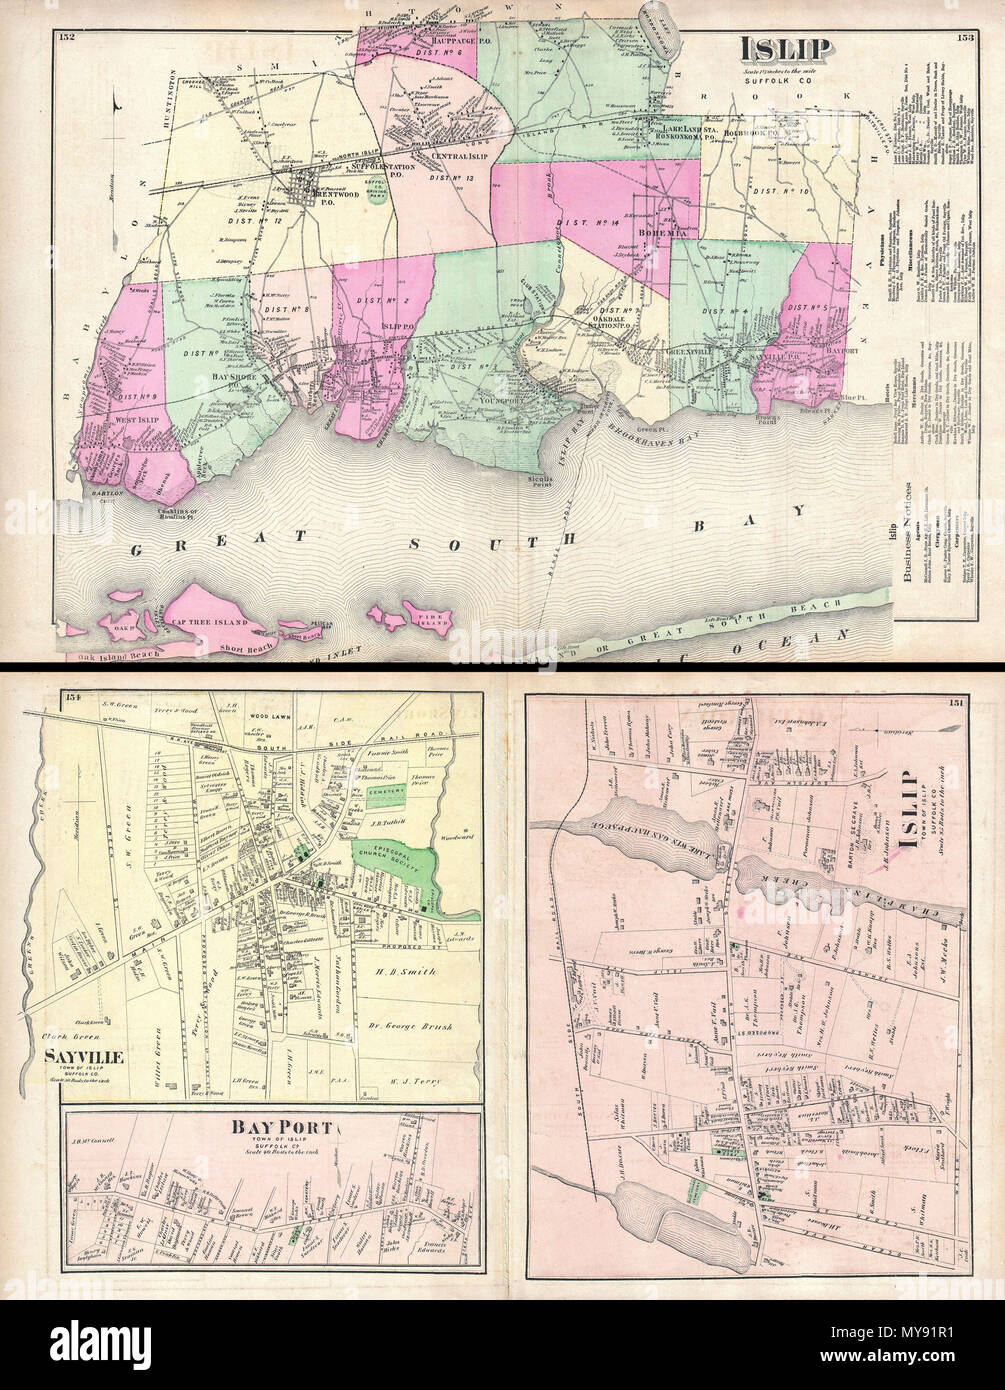 . Islip, Suffolk, Co. - Islip, Town of Islip, Suffold Co. - Bay Port, Town of Islip, Suffold Co. - Sayville, Town of Islip, Suffold Co.  English: A scarce example of Fredrick W. Beers’ map of the Islip and Sayville, Long Island, New York. Published in 1873. Islip side covers from Babylon Cove and West Islip eastward past Bay Shore, Islip, young Point, Oakdale, Greenville to Sayville and Bayport. Includes parts of Oak Island and Fire Island. Notations to the right of the map proper offer business notices. On the verso, sheet is divided into three town plans. These include Islip, Sayville and Ba Stock Photo